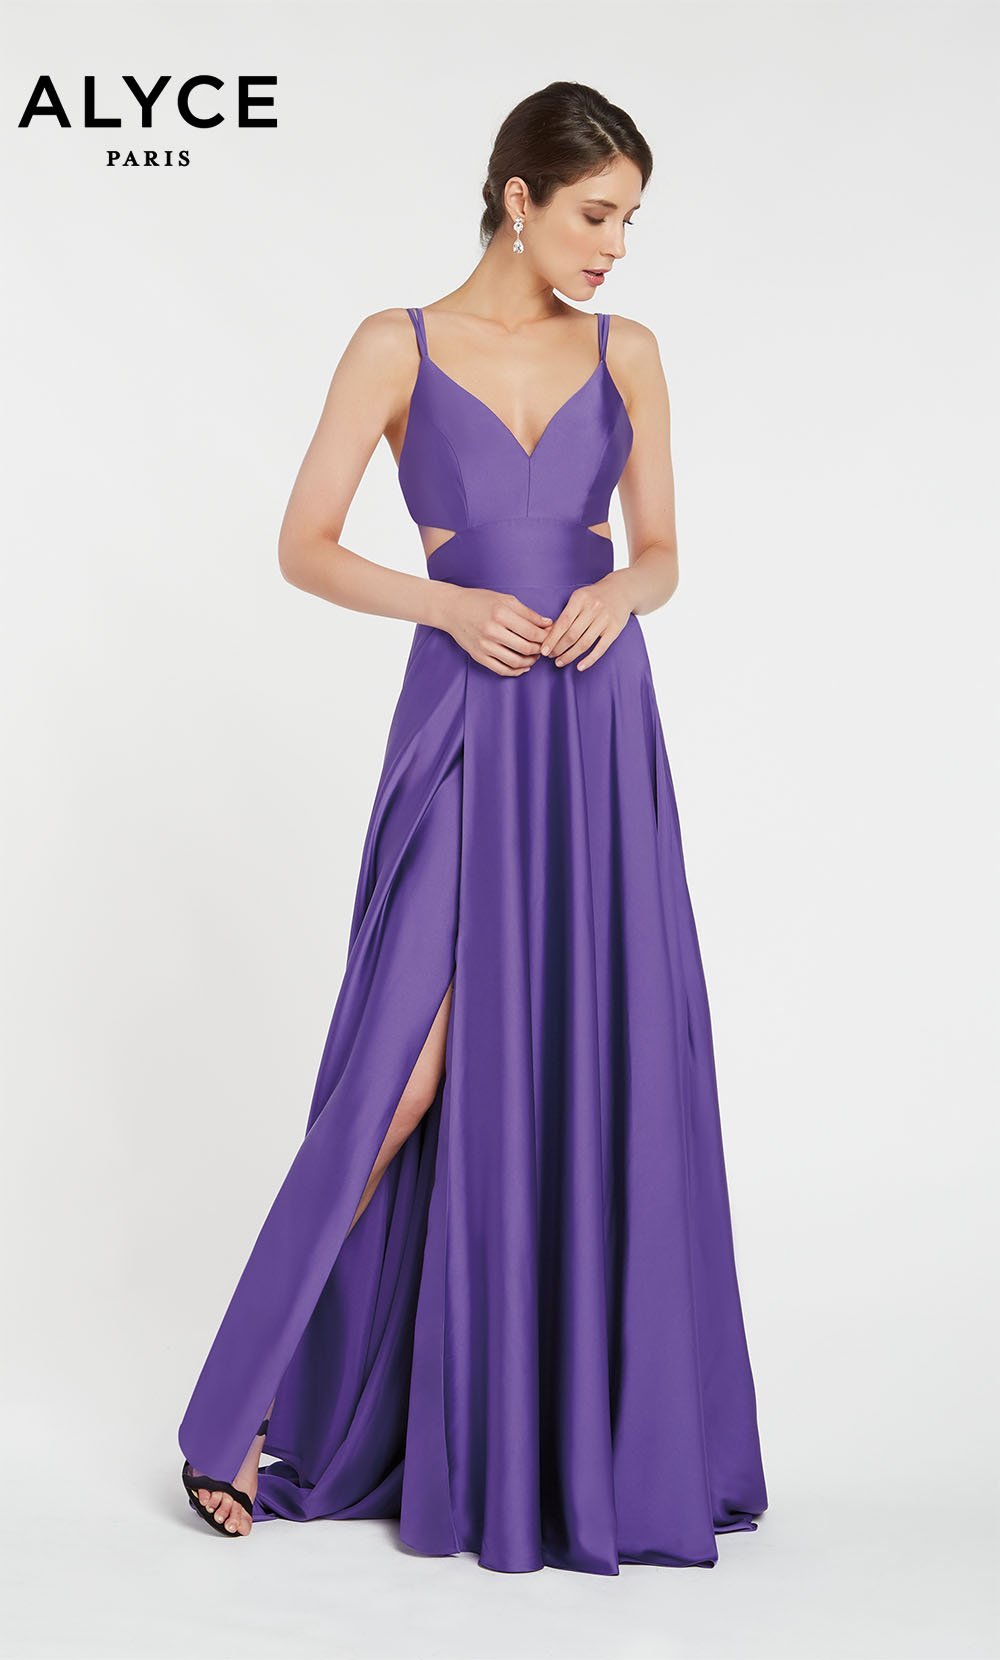 Alyce Paris 60453 dress images in these colors: Blush,  Sage Green,  Royal,  Midnight,  Purple.